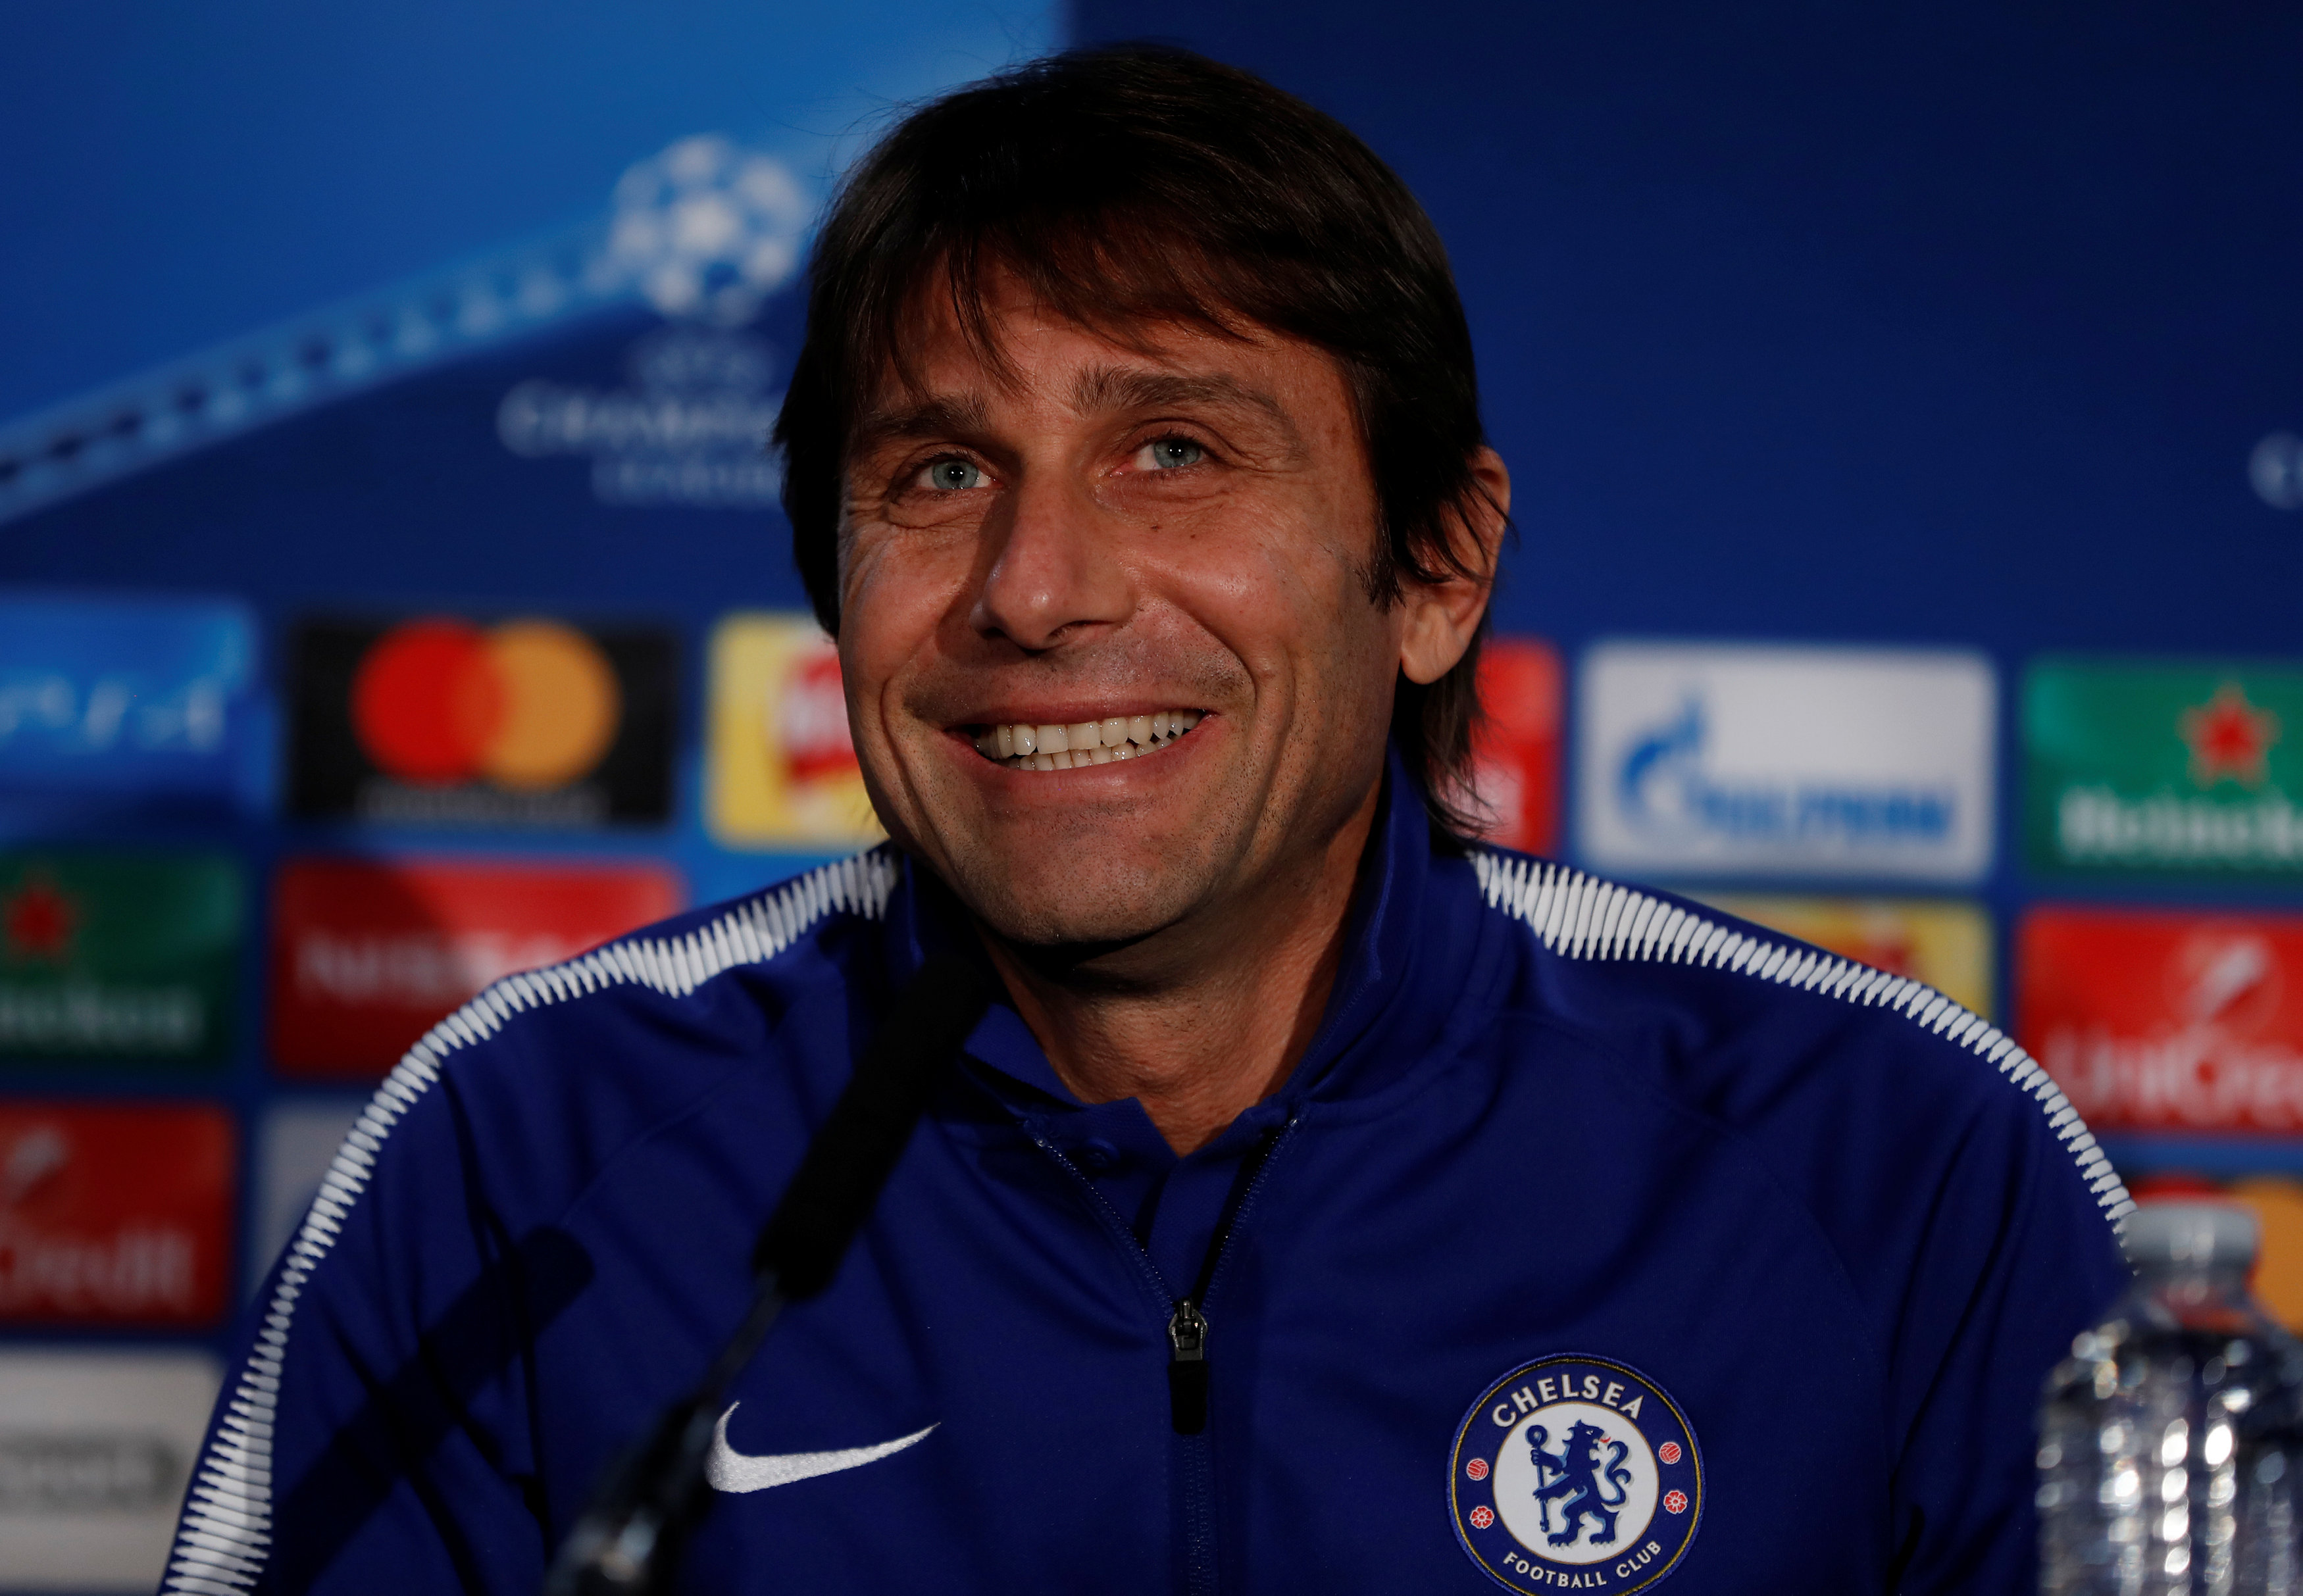 Football: Chelsea must secure top-four finish, says Conte